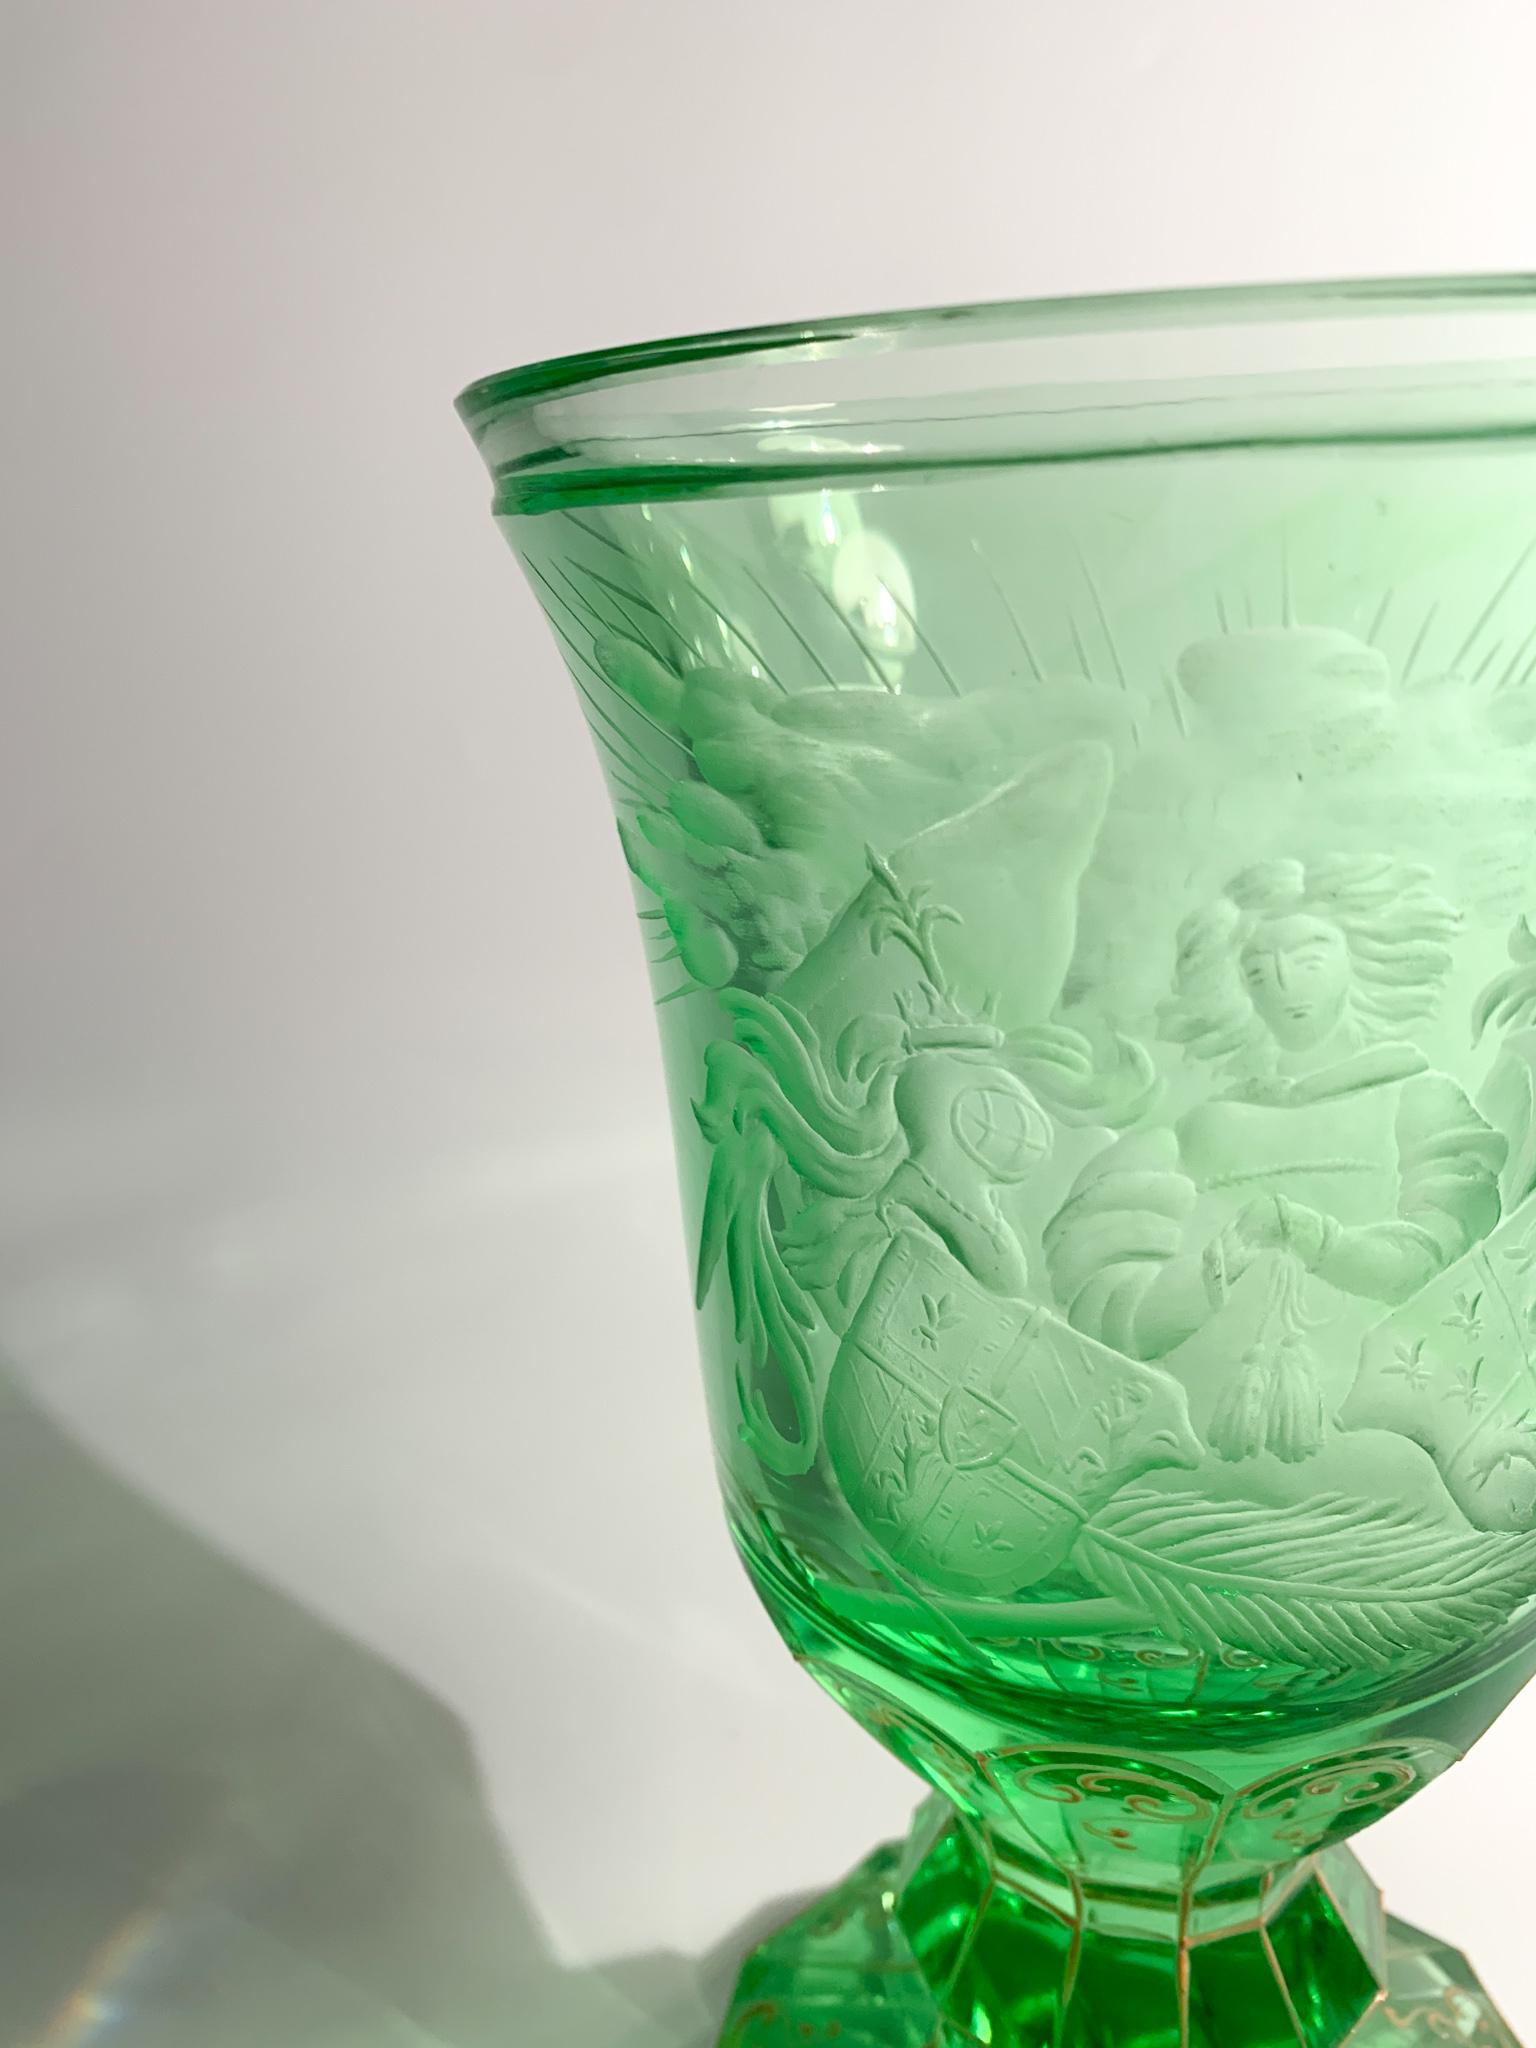 Late 19th Century Vase in Green Biedermeier Crystal Decorated with Acid from the 1800s